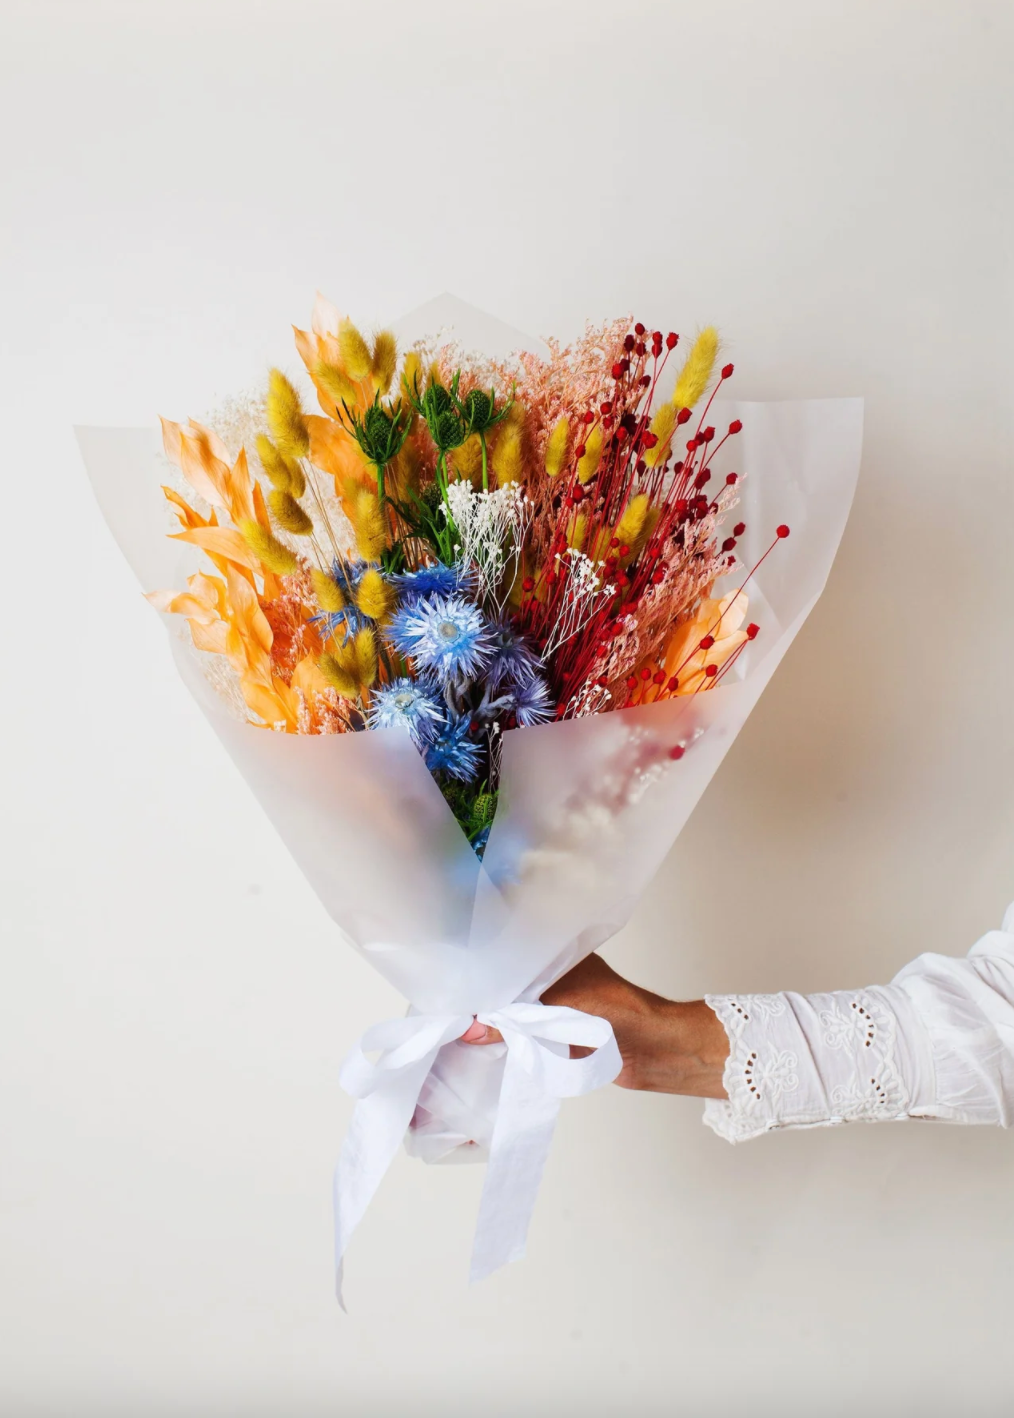 Dried Flowers: Where To Buy, Best Varieties And Arrangement Tips